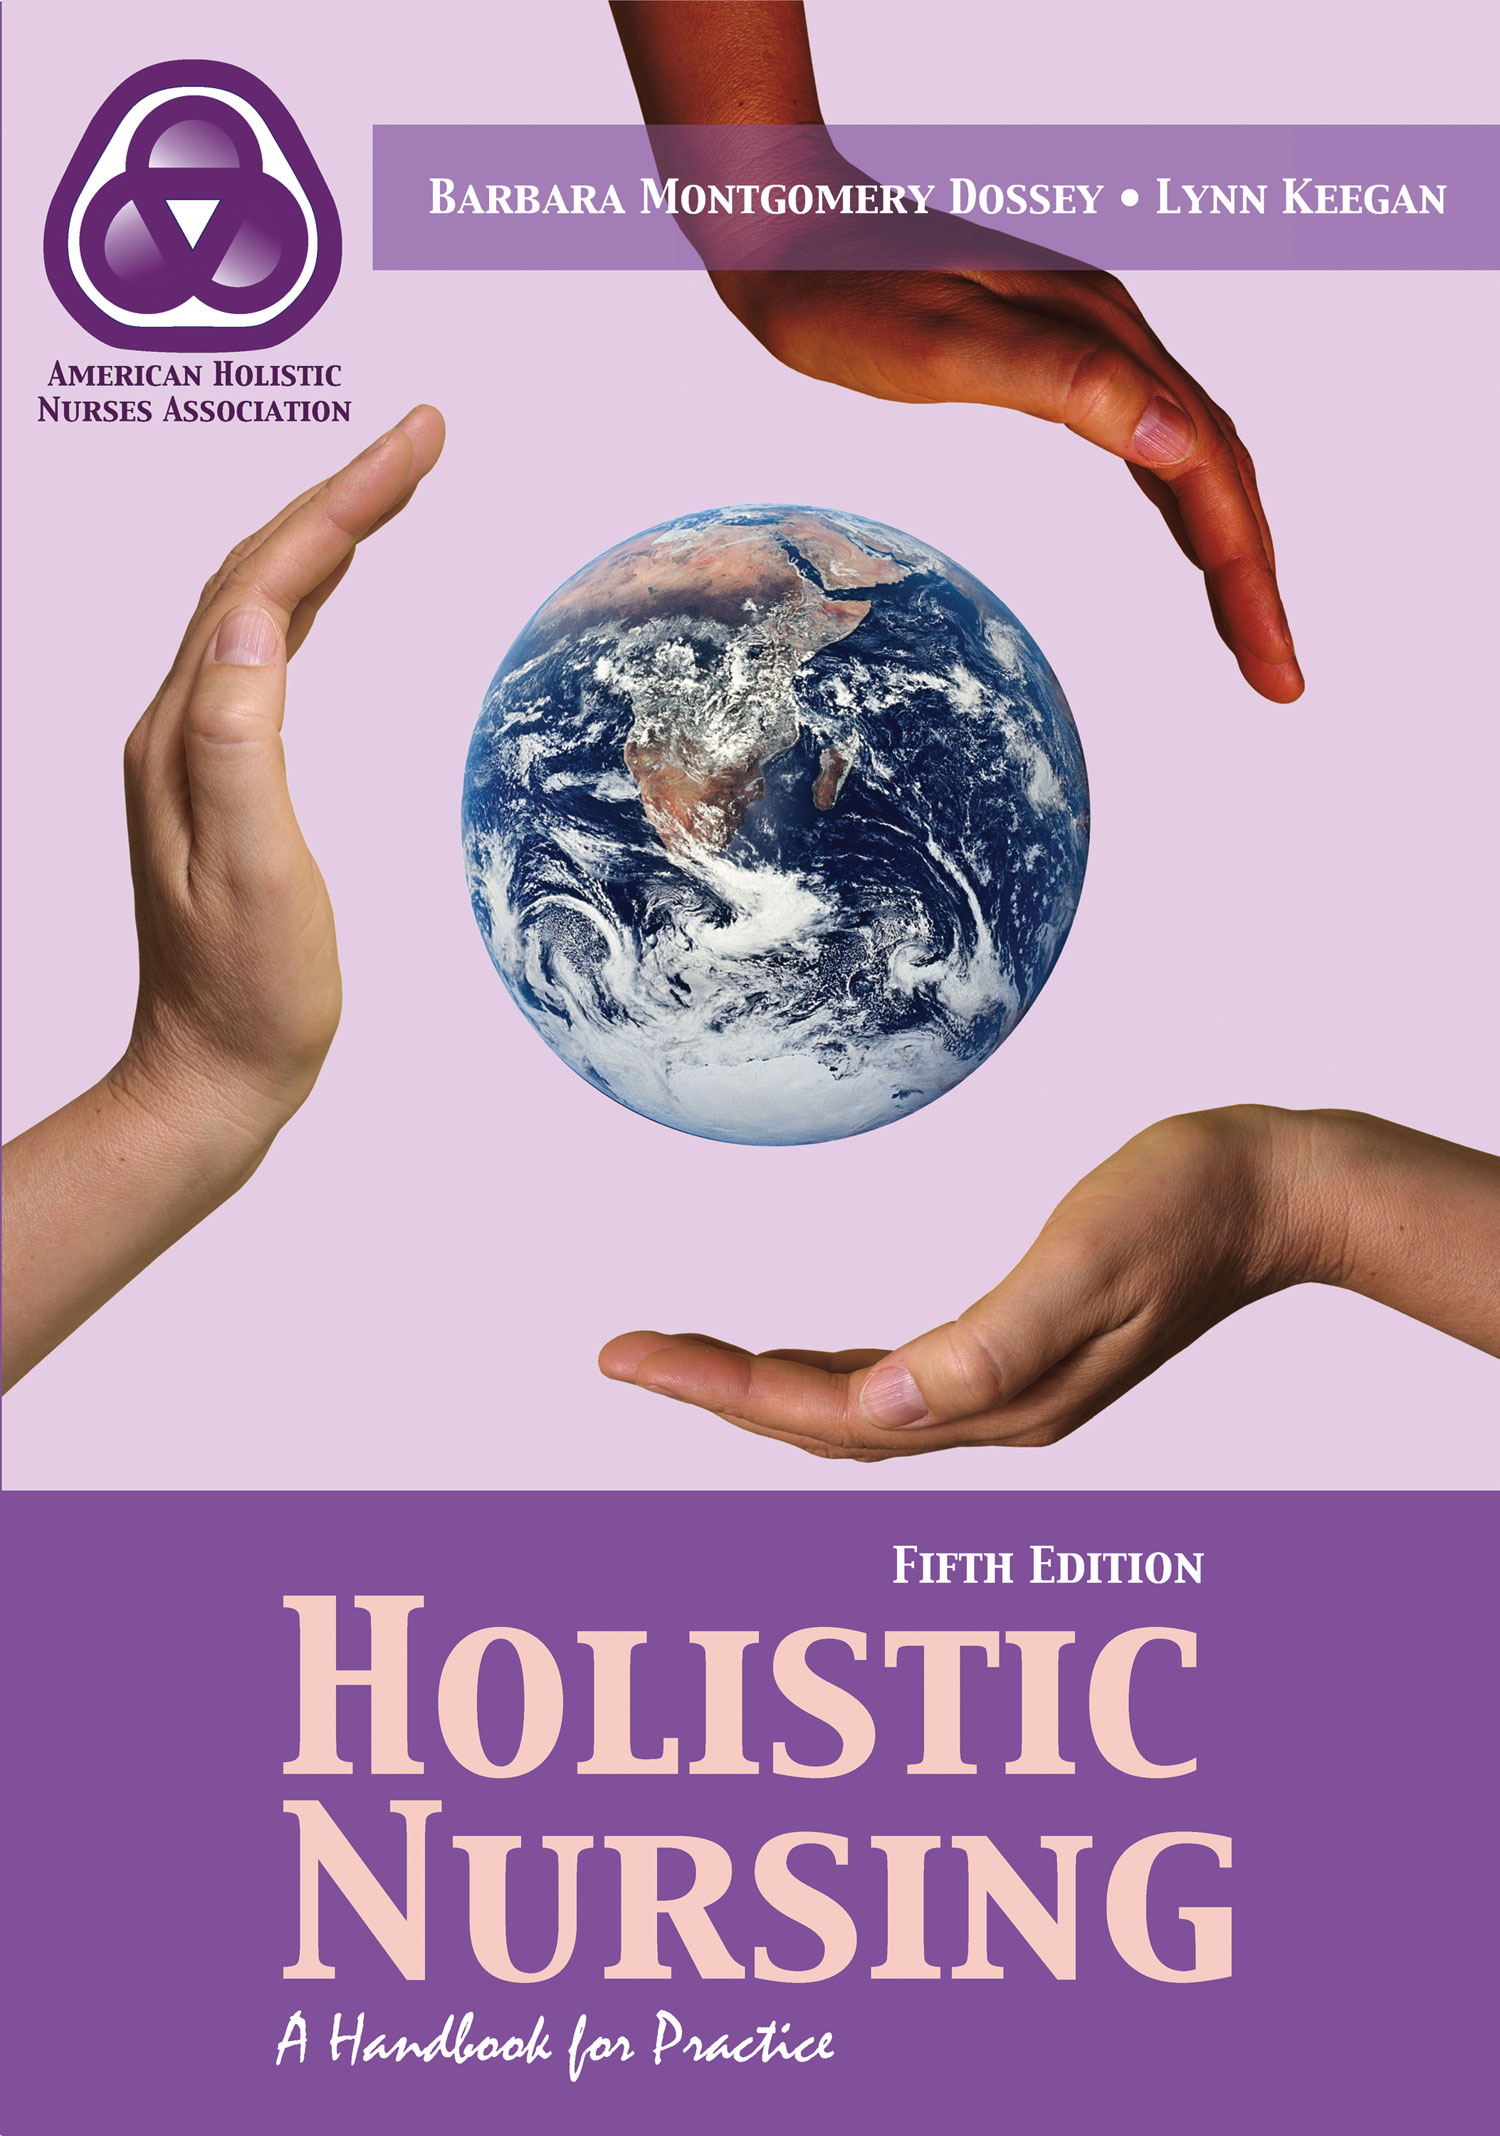 Image of the book cover for 'HOLISTIC NURSING'